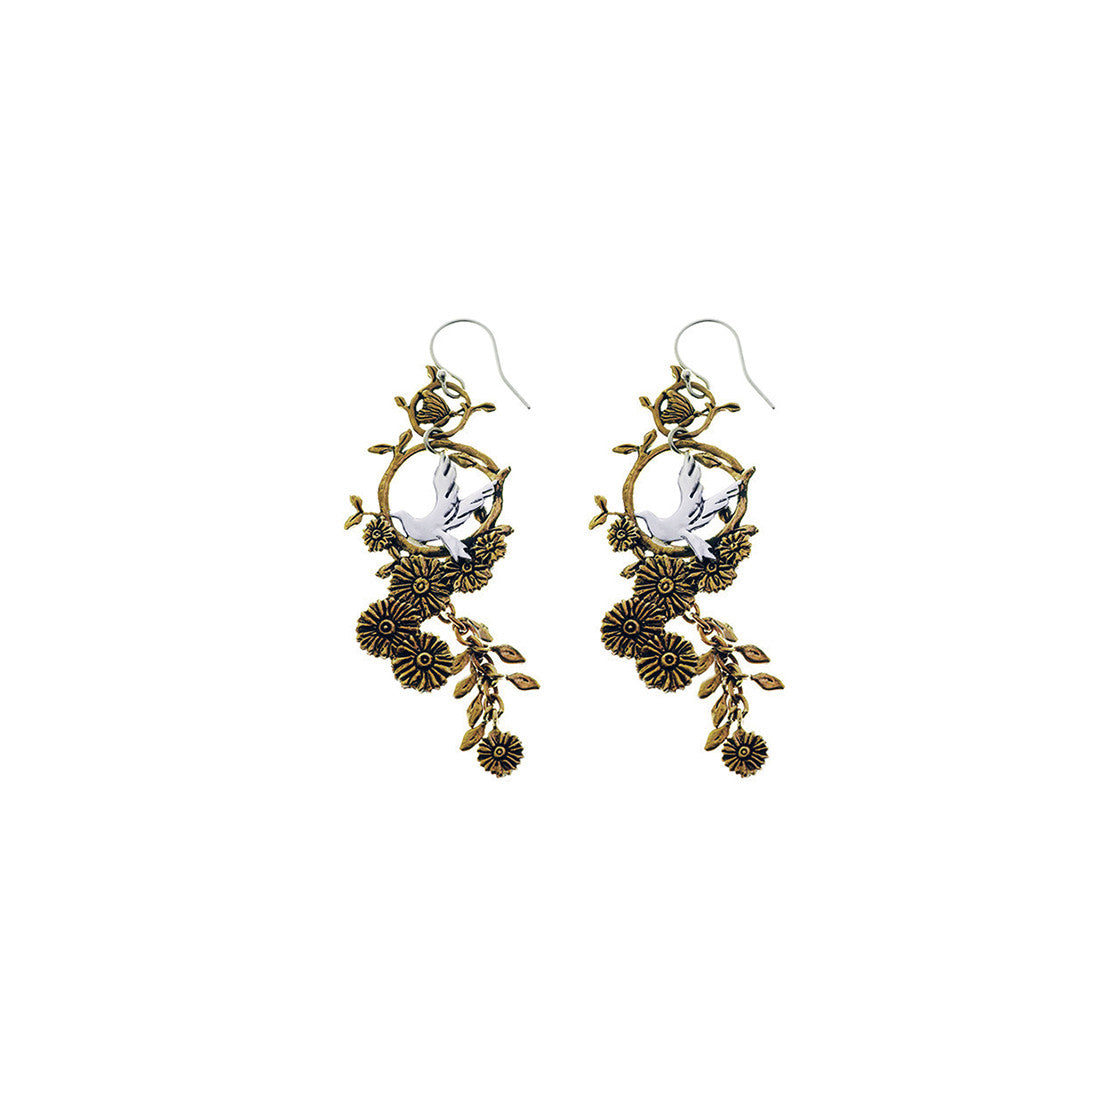 Revolution Dove Sterling Silver Bronze Drop Earring - Cynthia Gale New York Jewelry